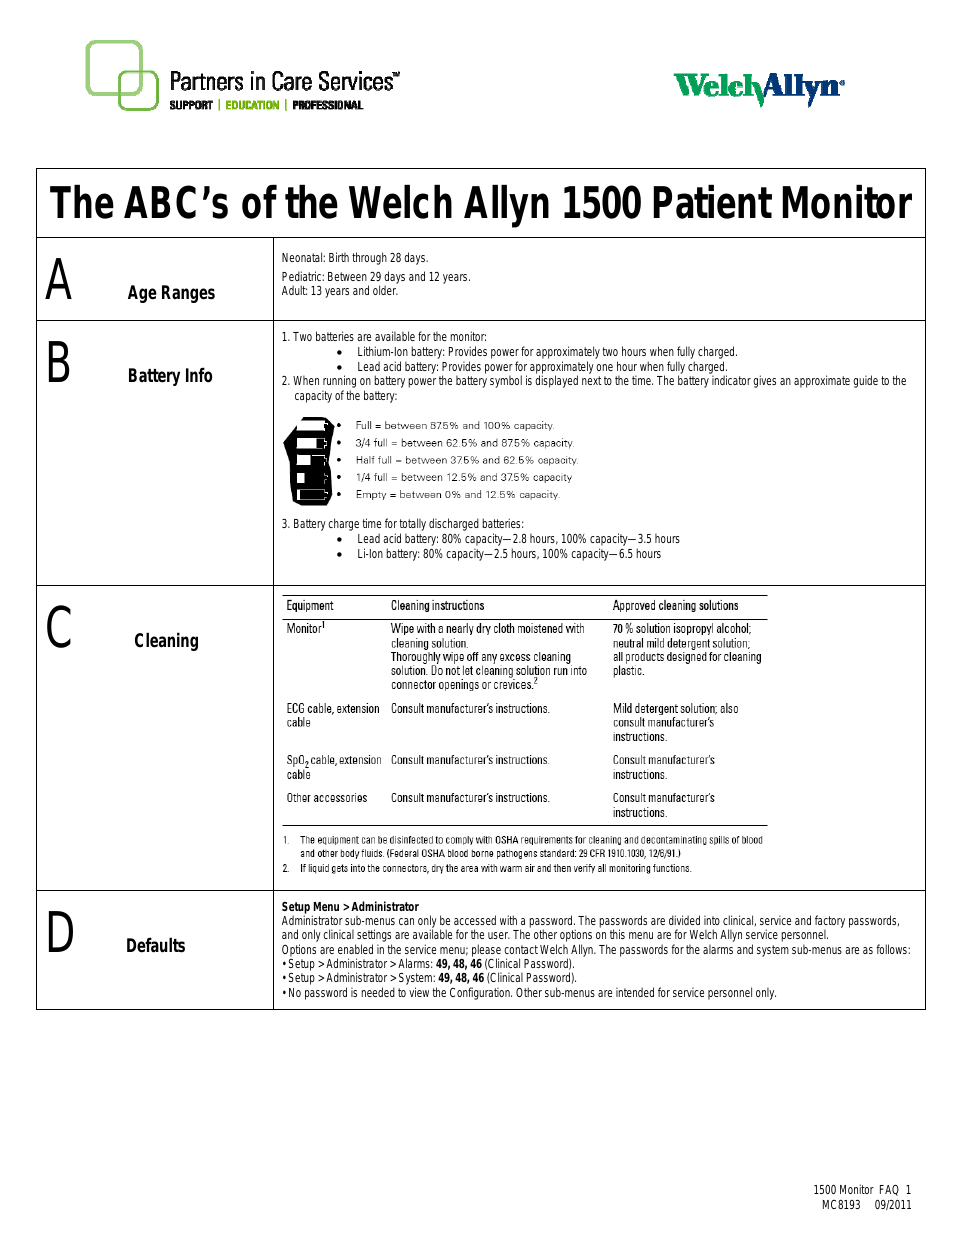 ABCs of the Welch Allyn 1500 Patient Monitor - Quick Reference Guide